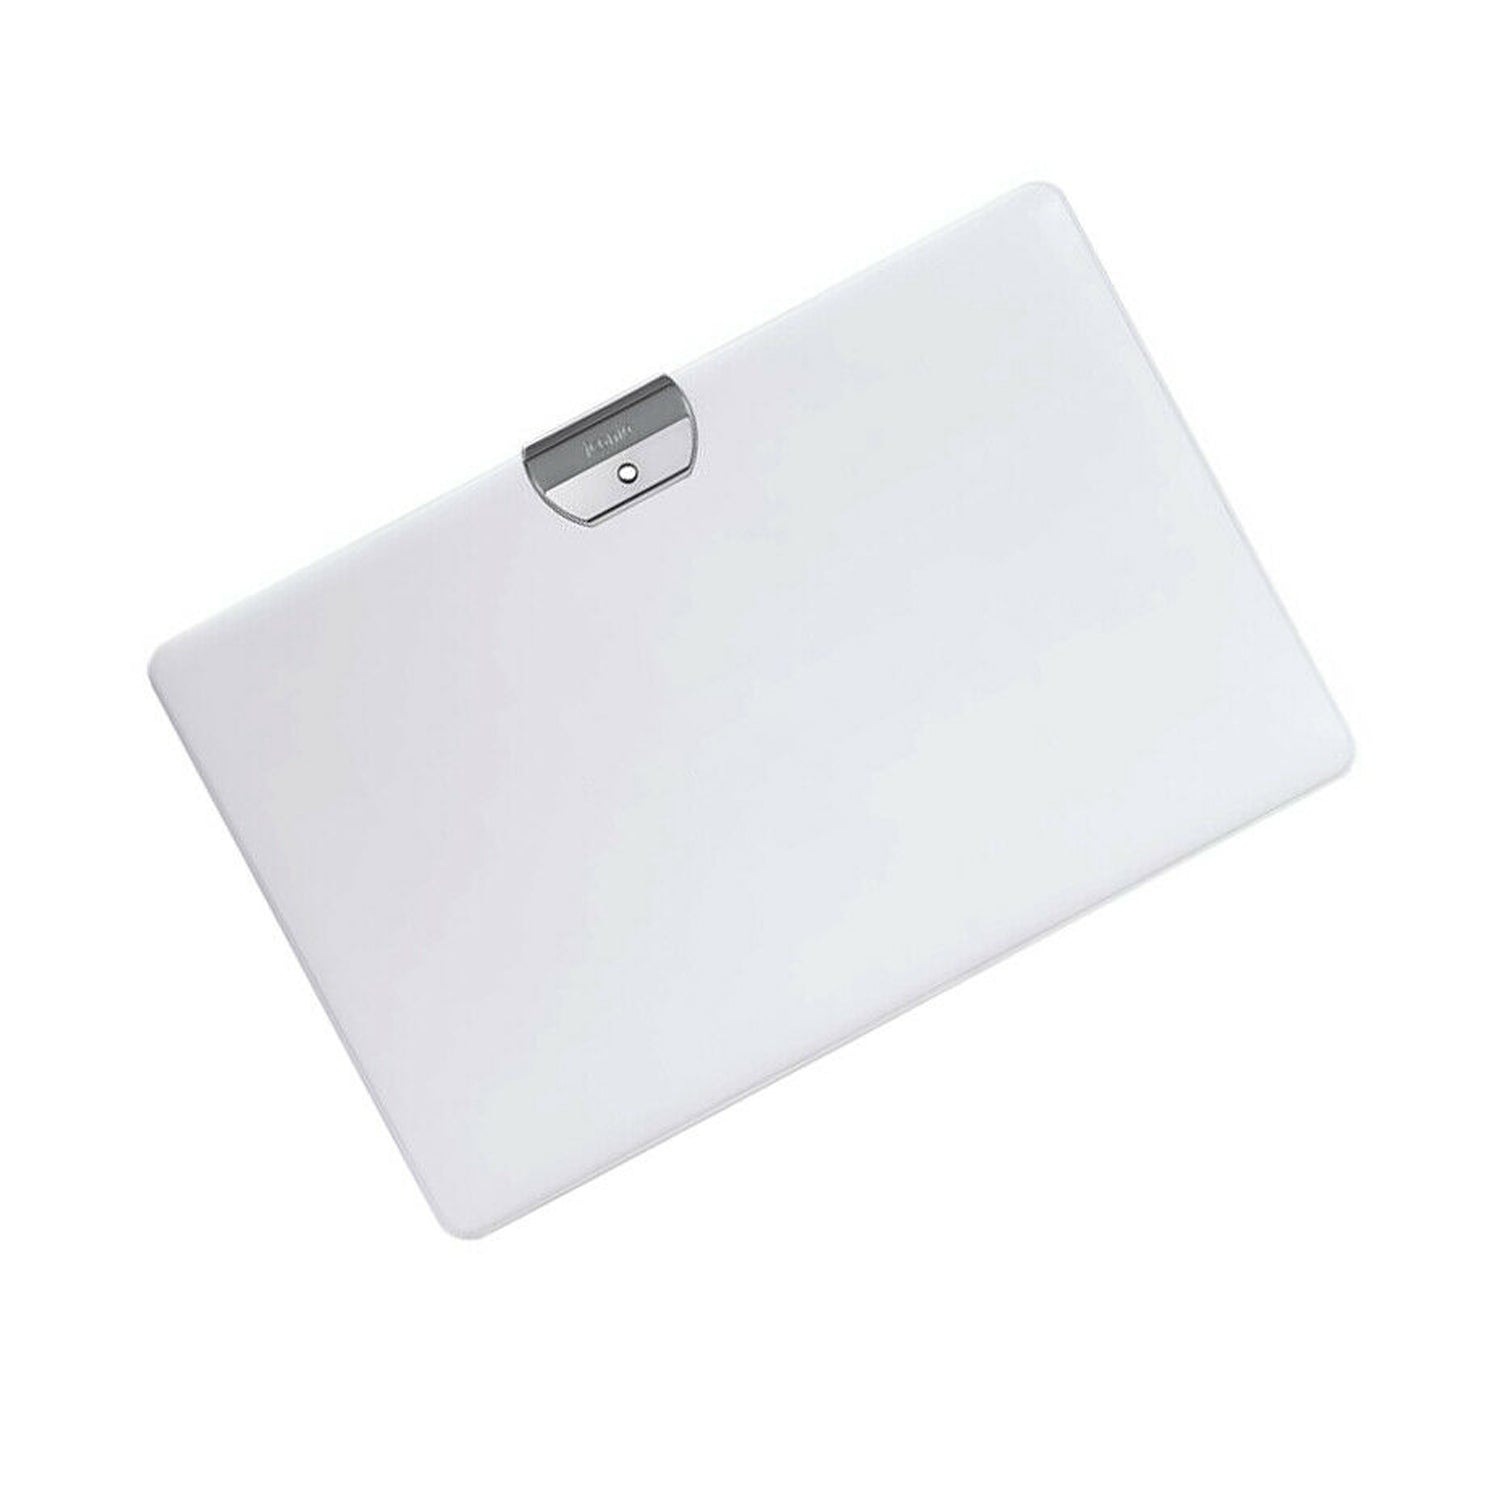 Back Cover For Acer Iconia B3-A30 A6003 [Pro-Mobile]